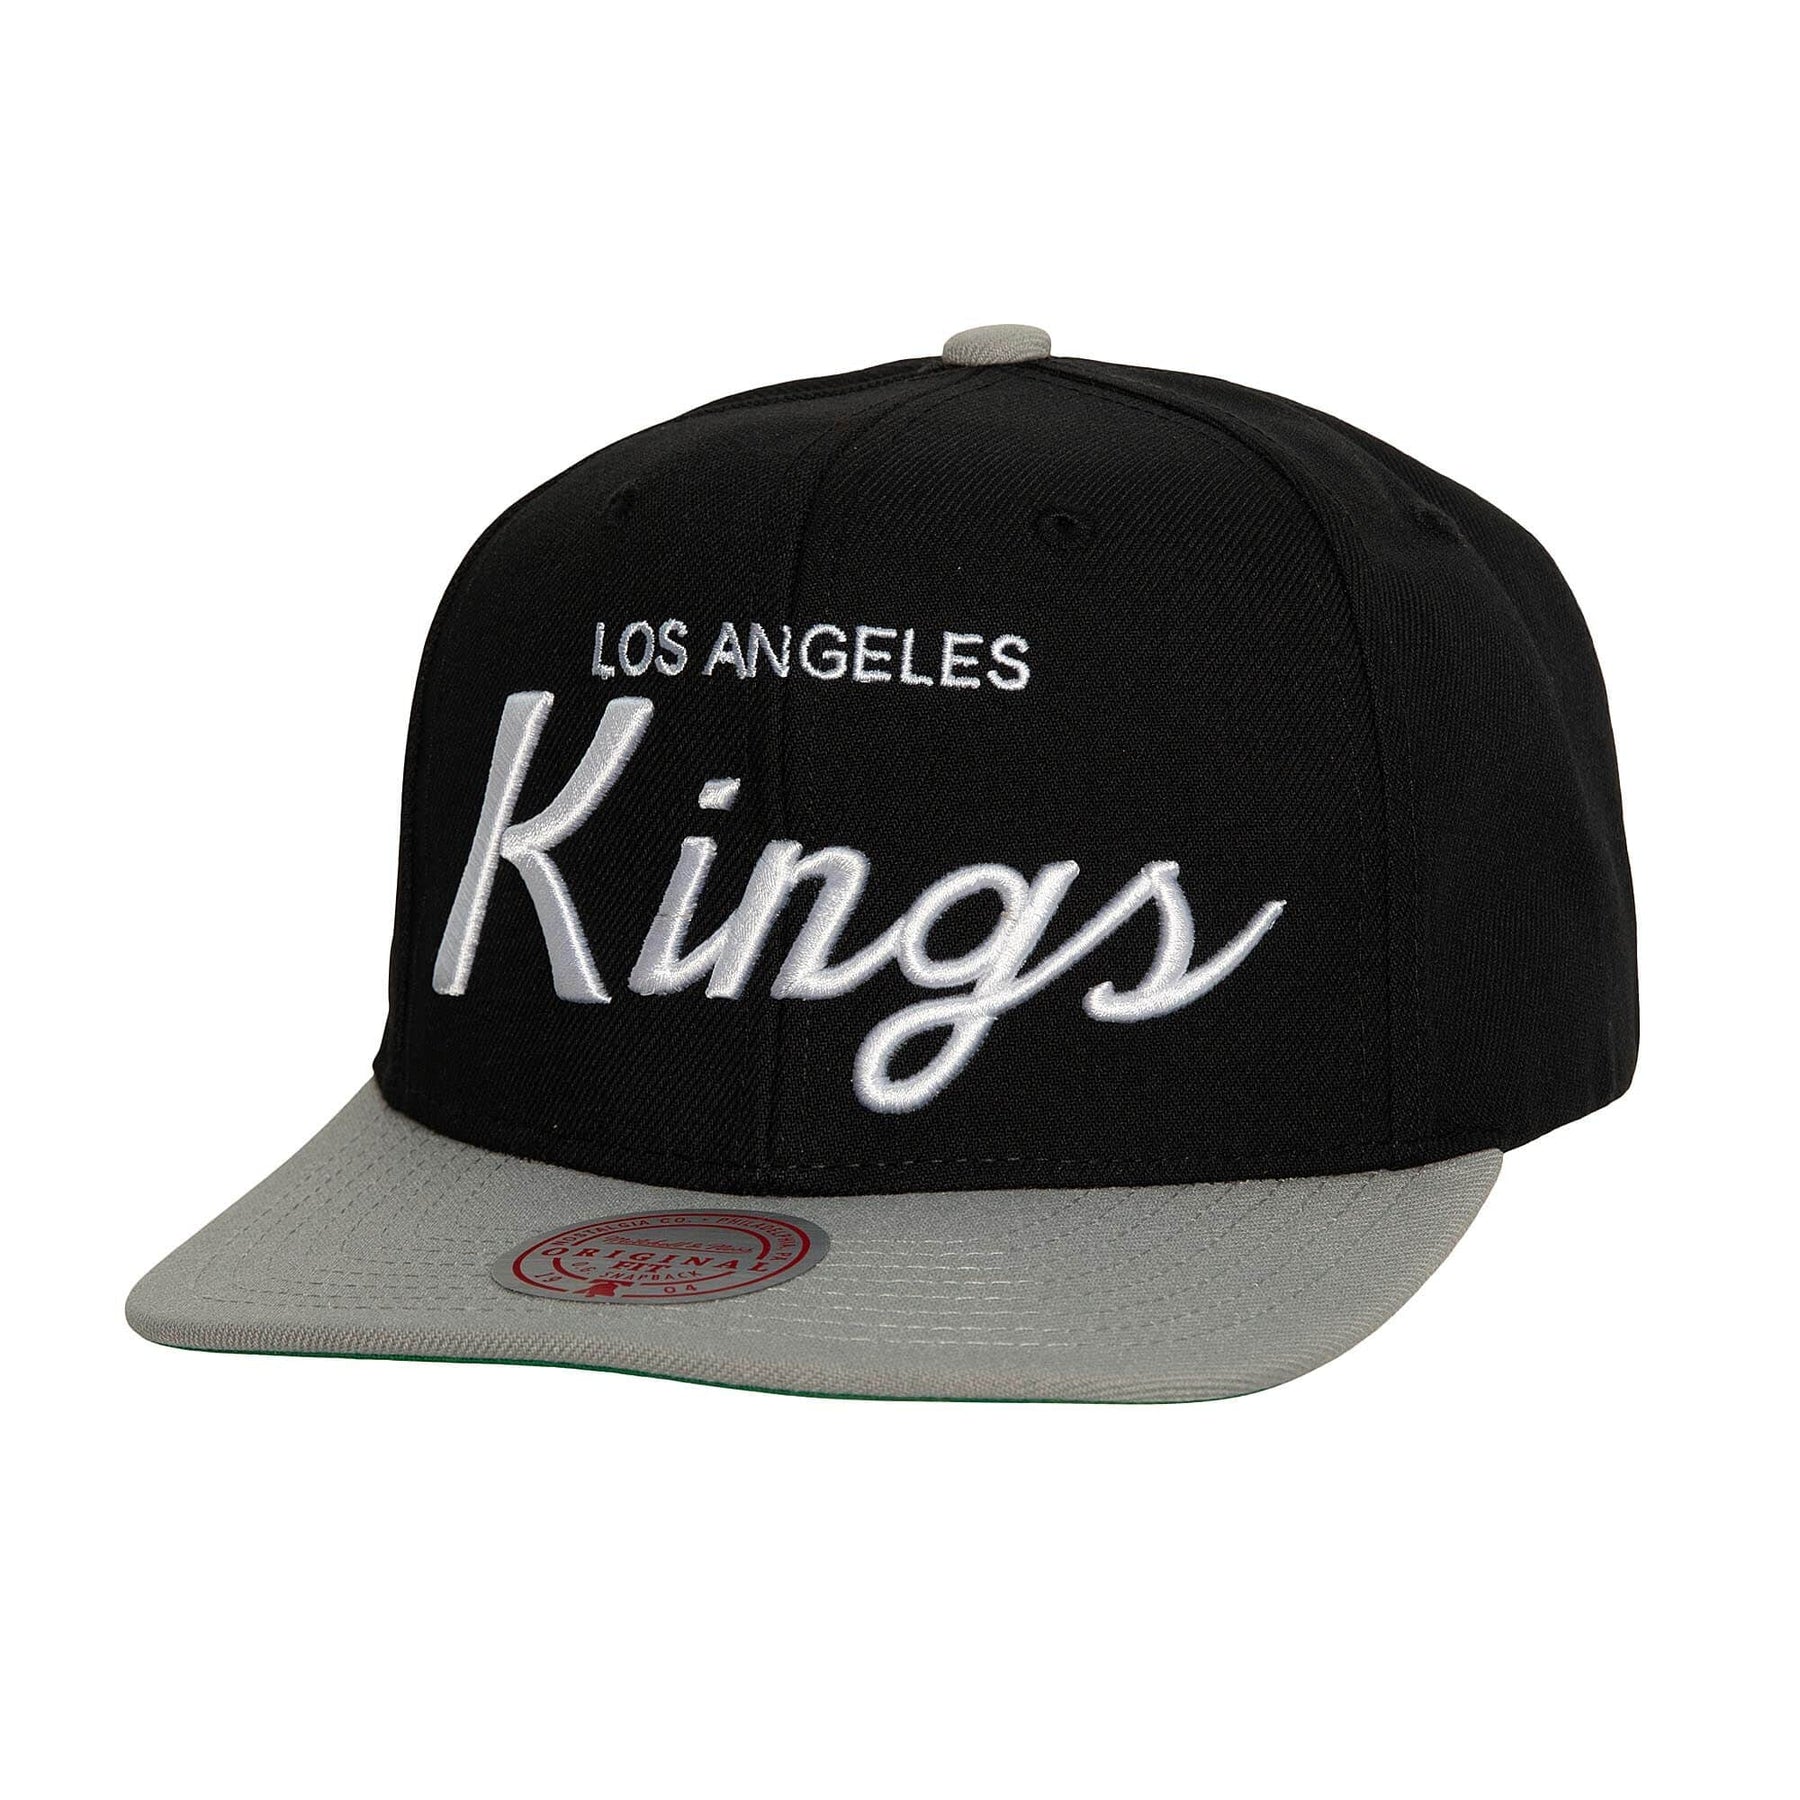 Shop Mitchell Ness Vintage Snapback with great discounts and